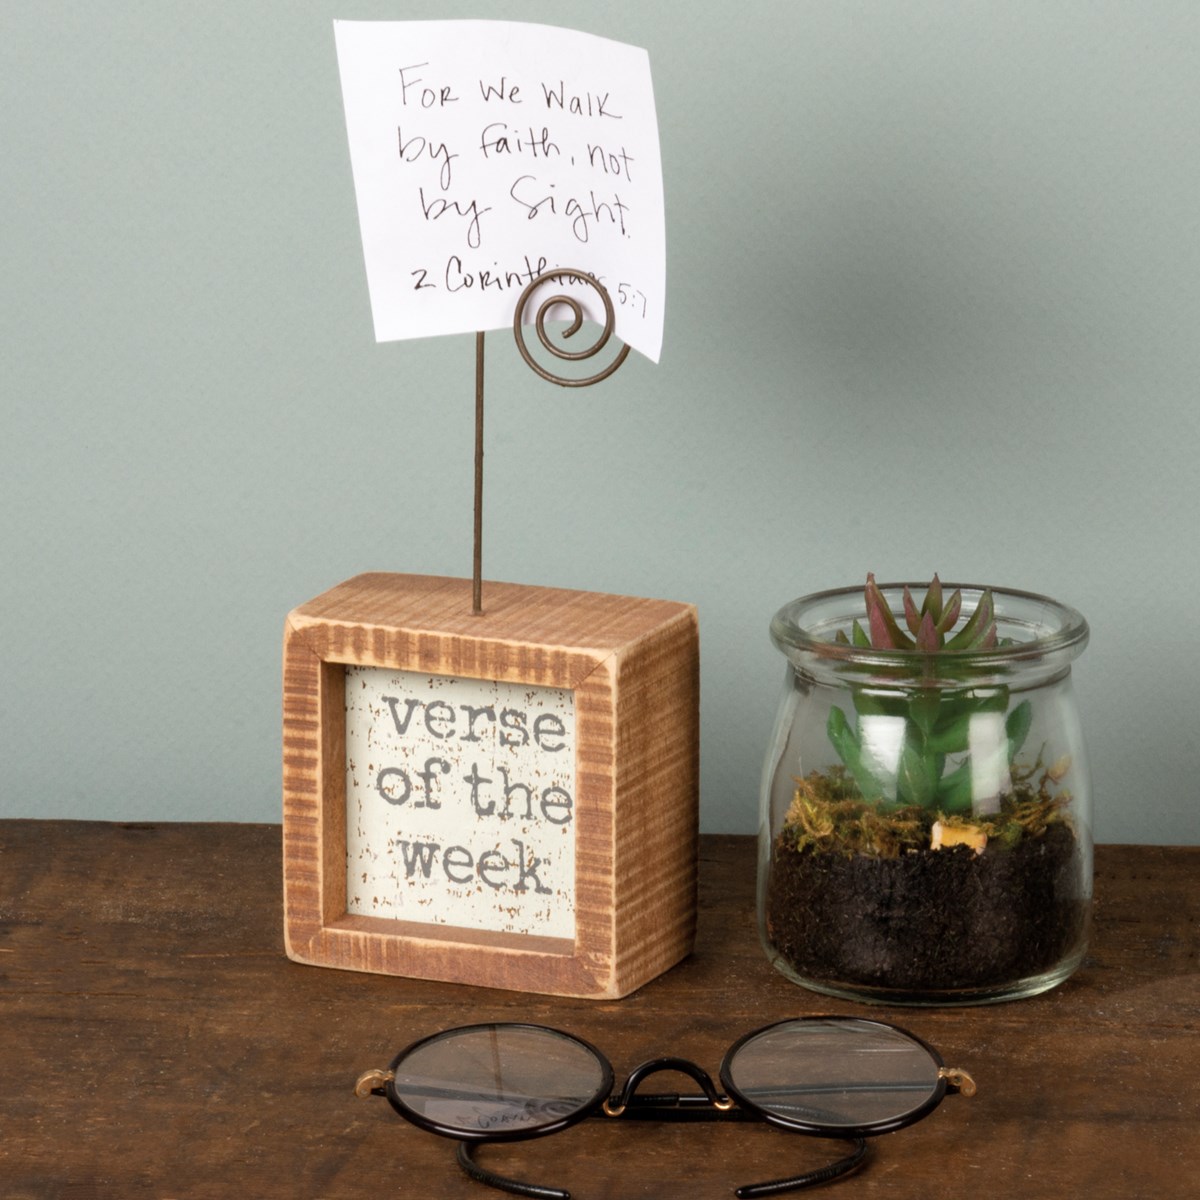 Verse of the week Mini Inset Photo Block - Wood, Wire